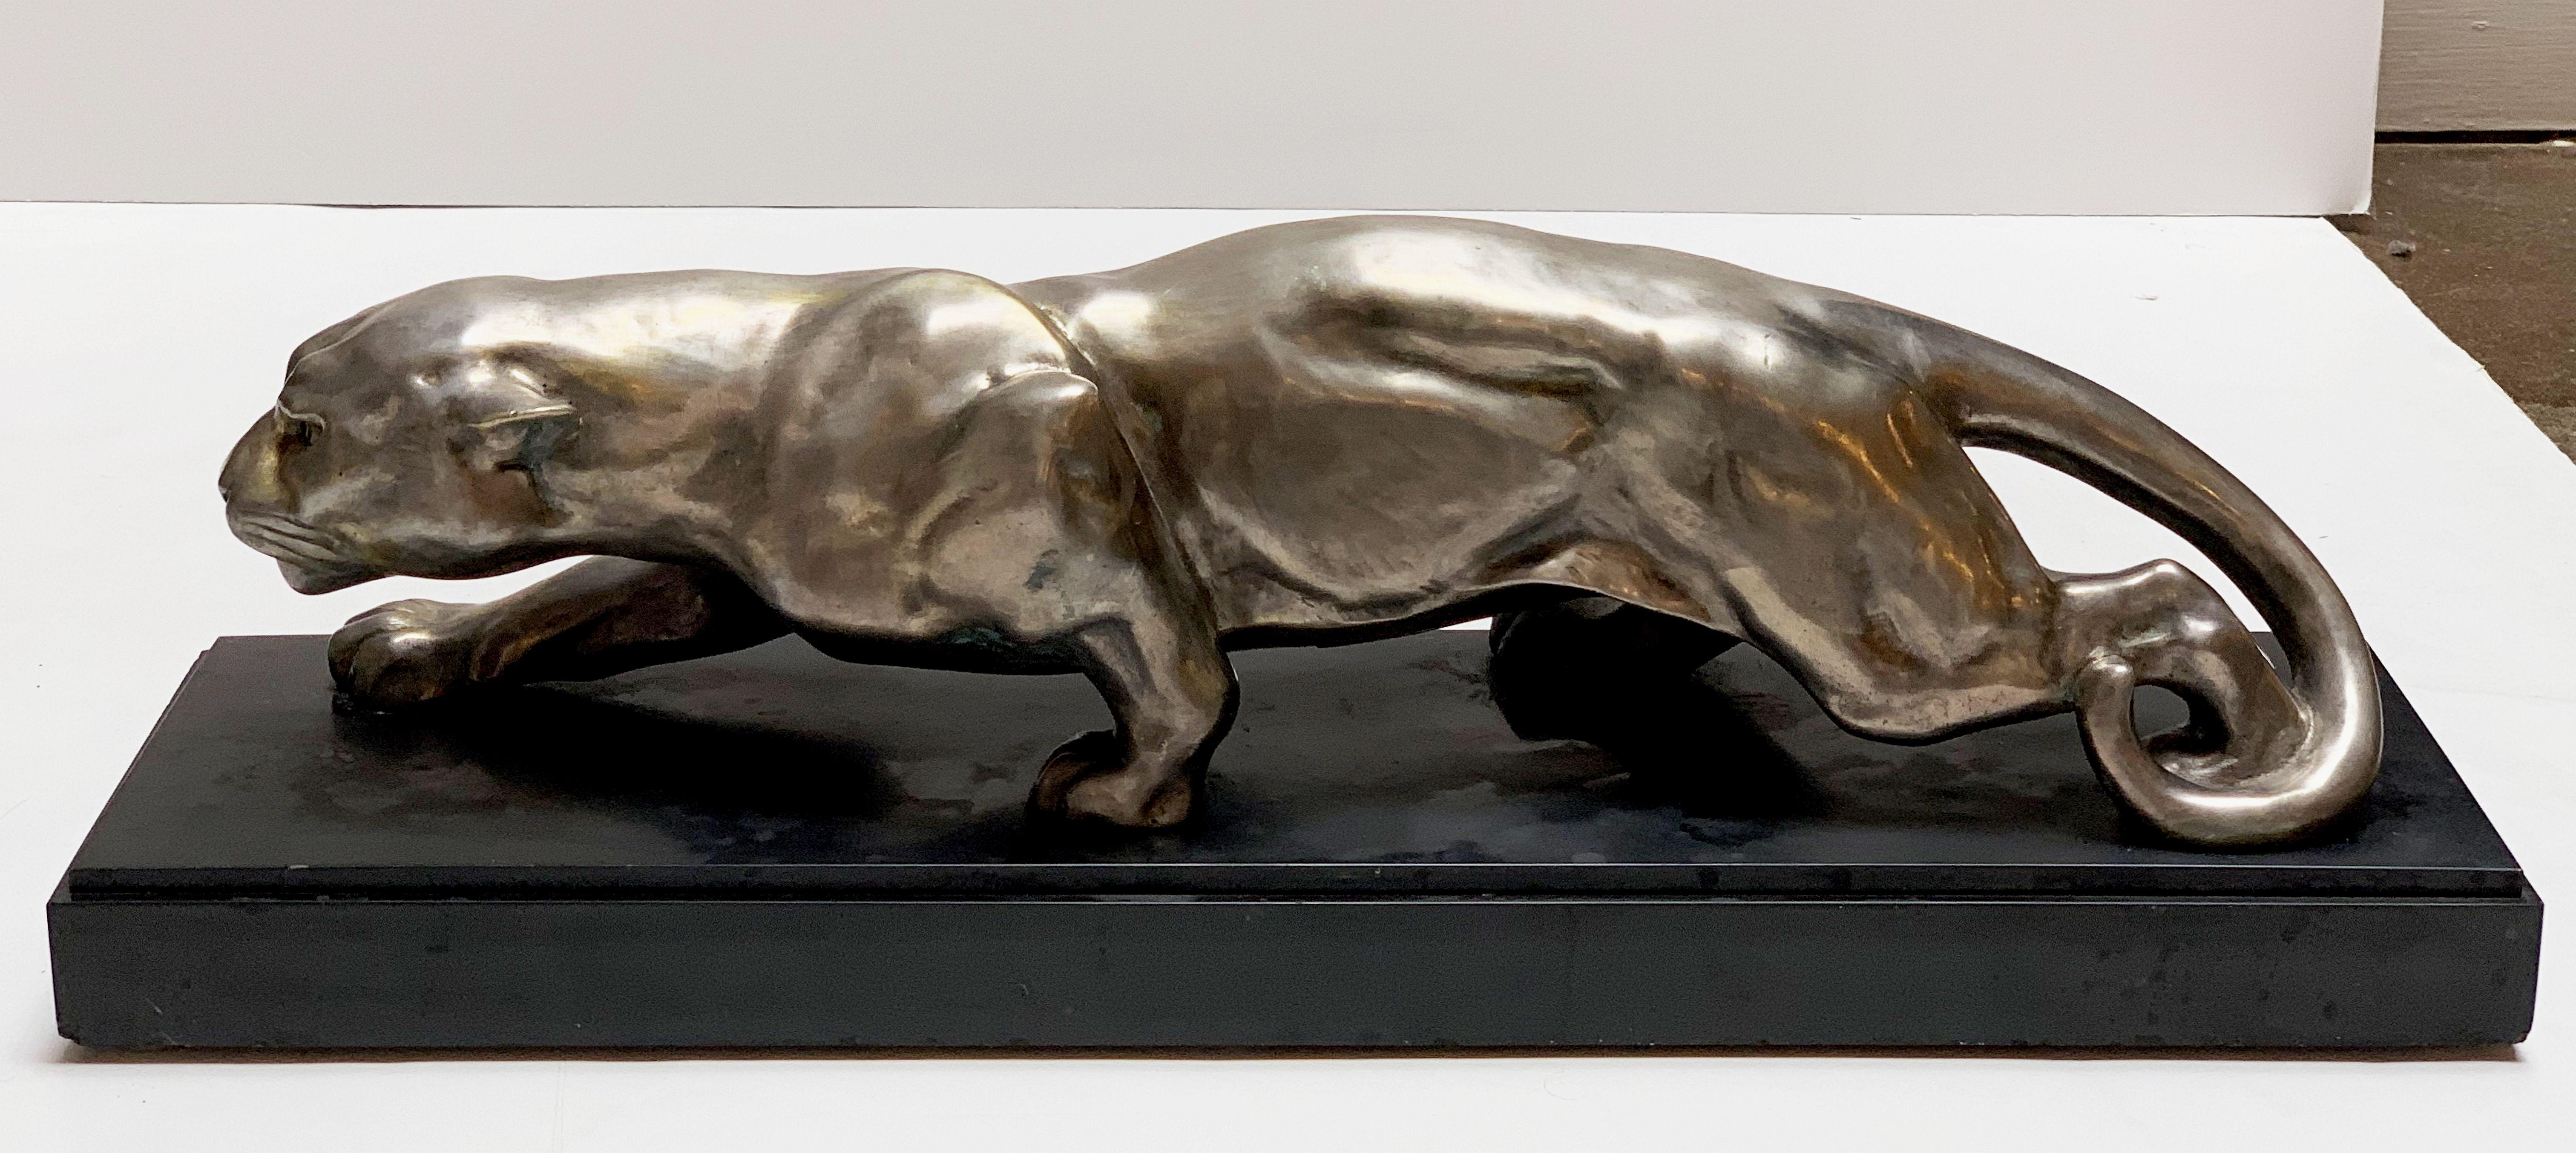 Large French Art Deco Bronze Panther Sculpture on Marble by Deslin 1